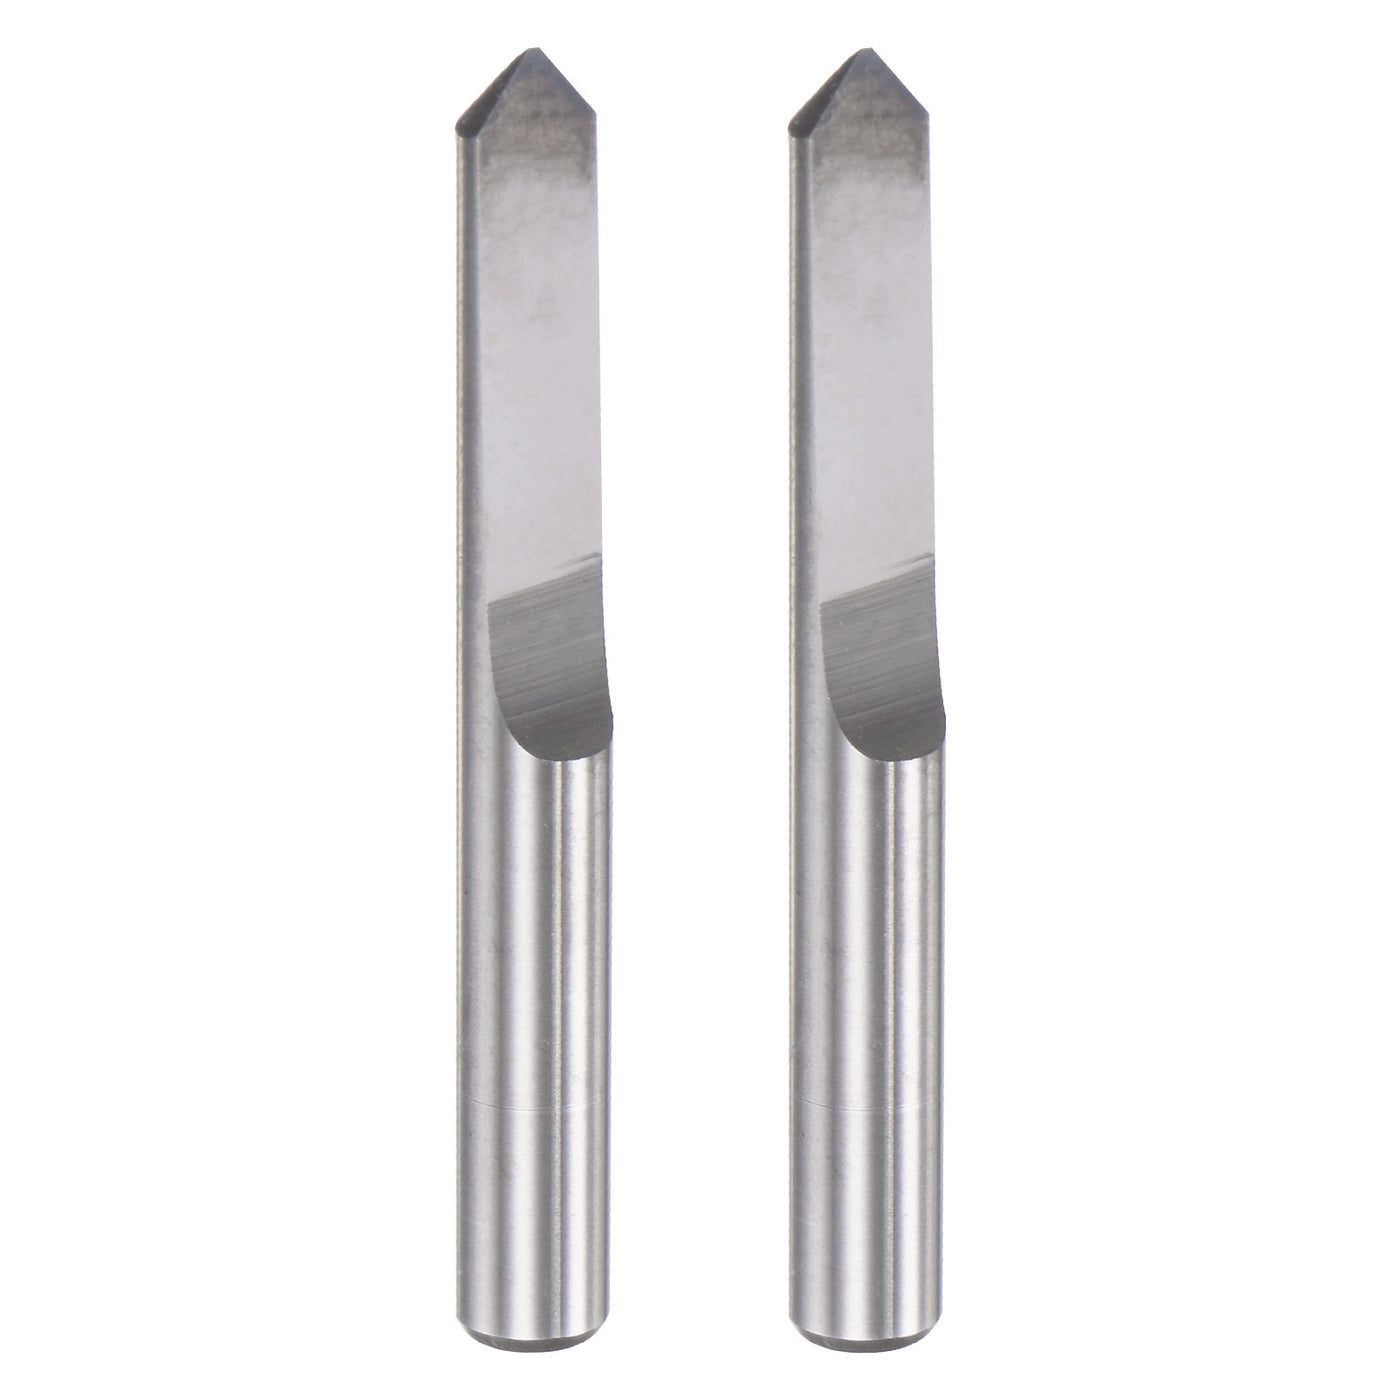 uxcell Uxcell 1/8" Shank 0.3mm Tip 90 Degree Solid Carbide Wood Engraving CNC Router Bit 2pcs